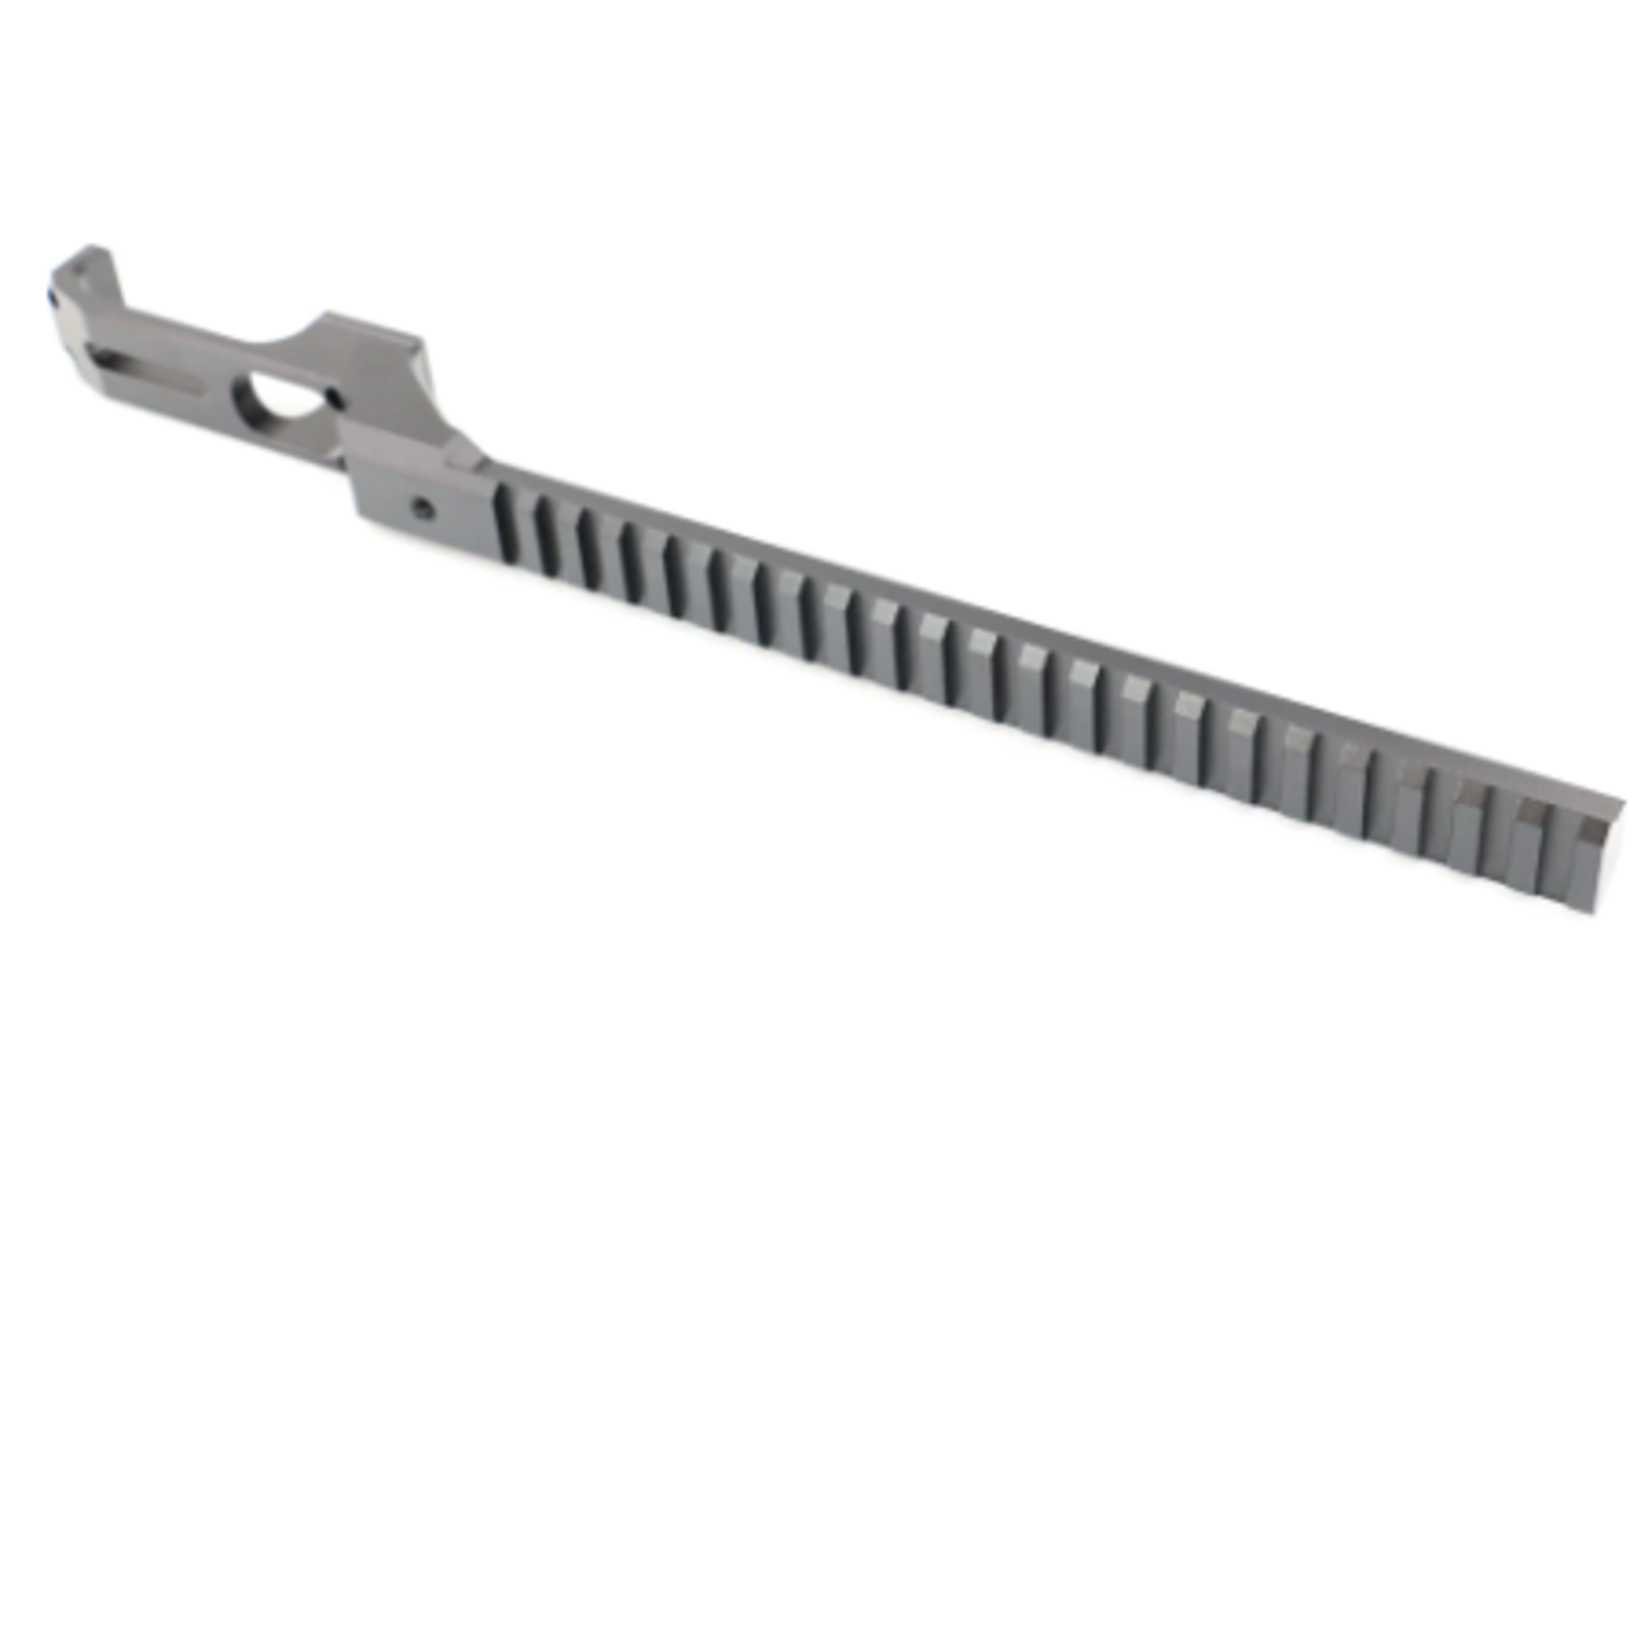 Saber Tactical Saber Tactical INC. Impact Extended Pic Rail ST0006